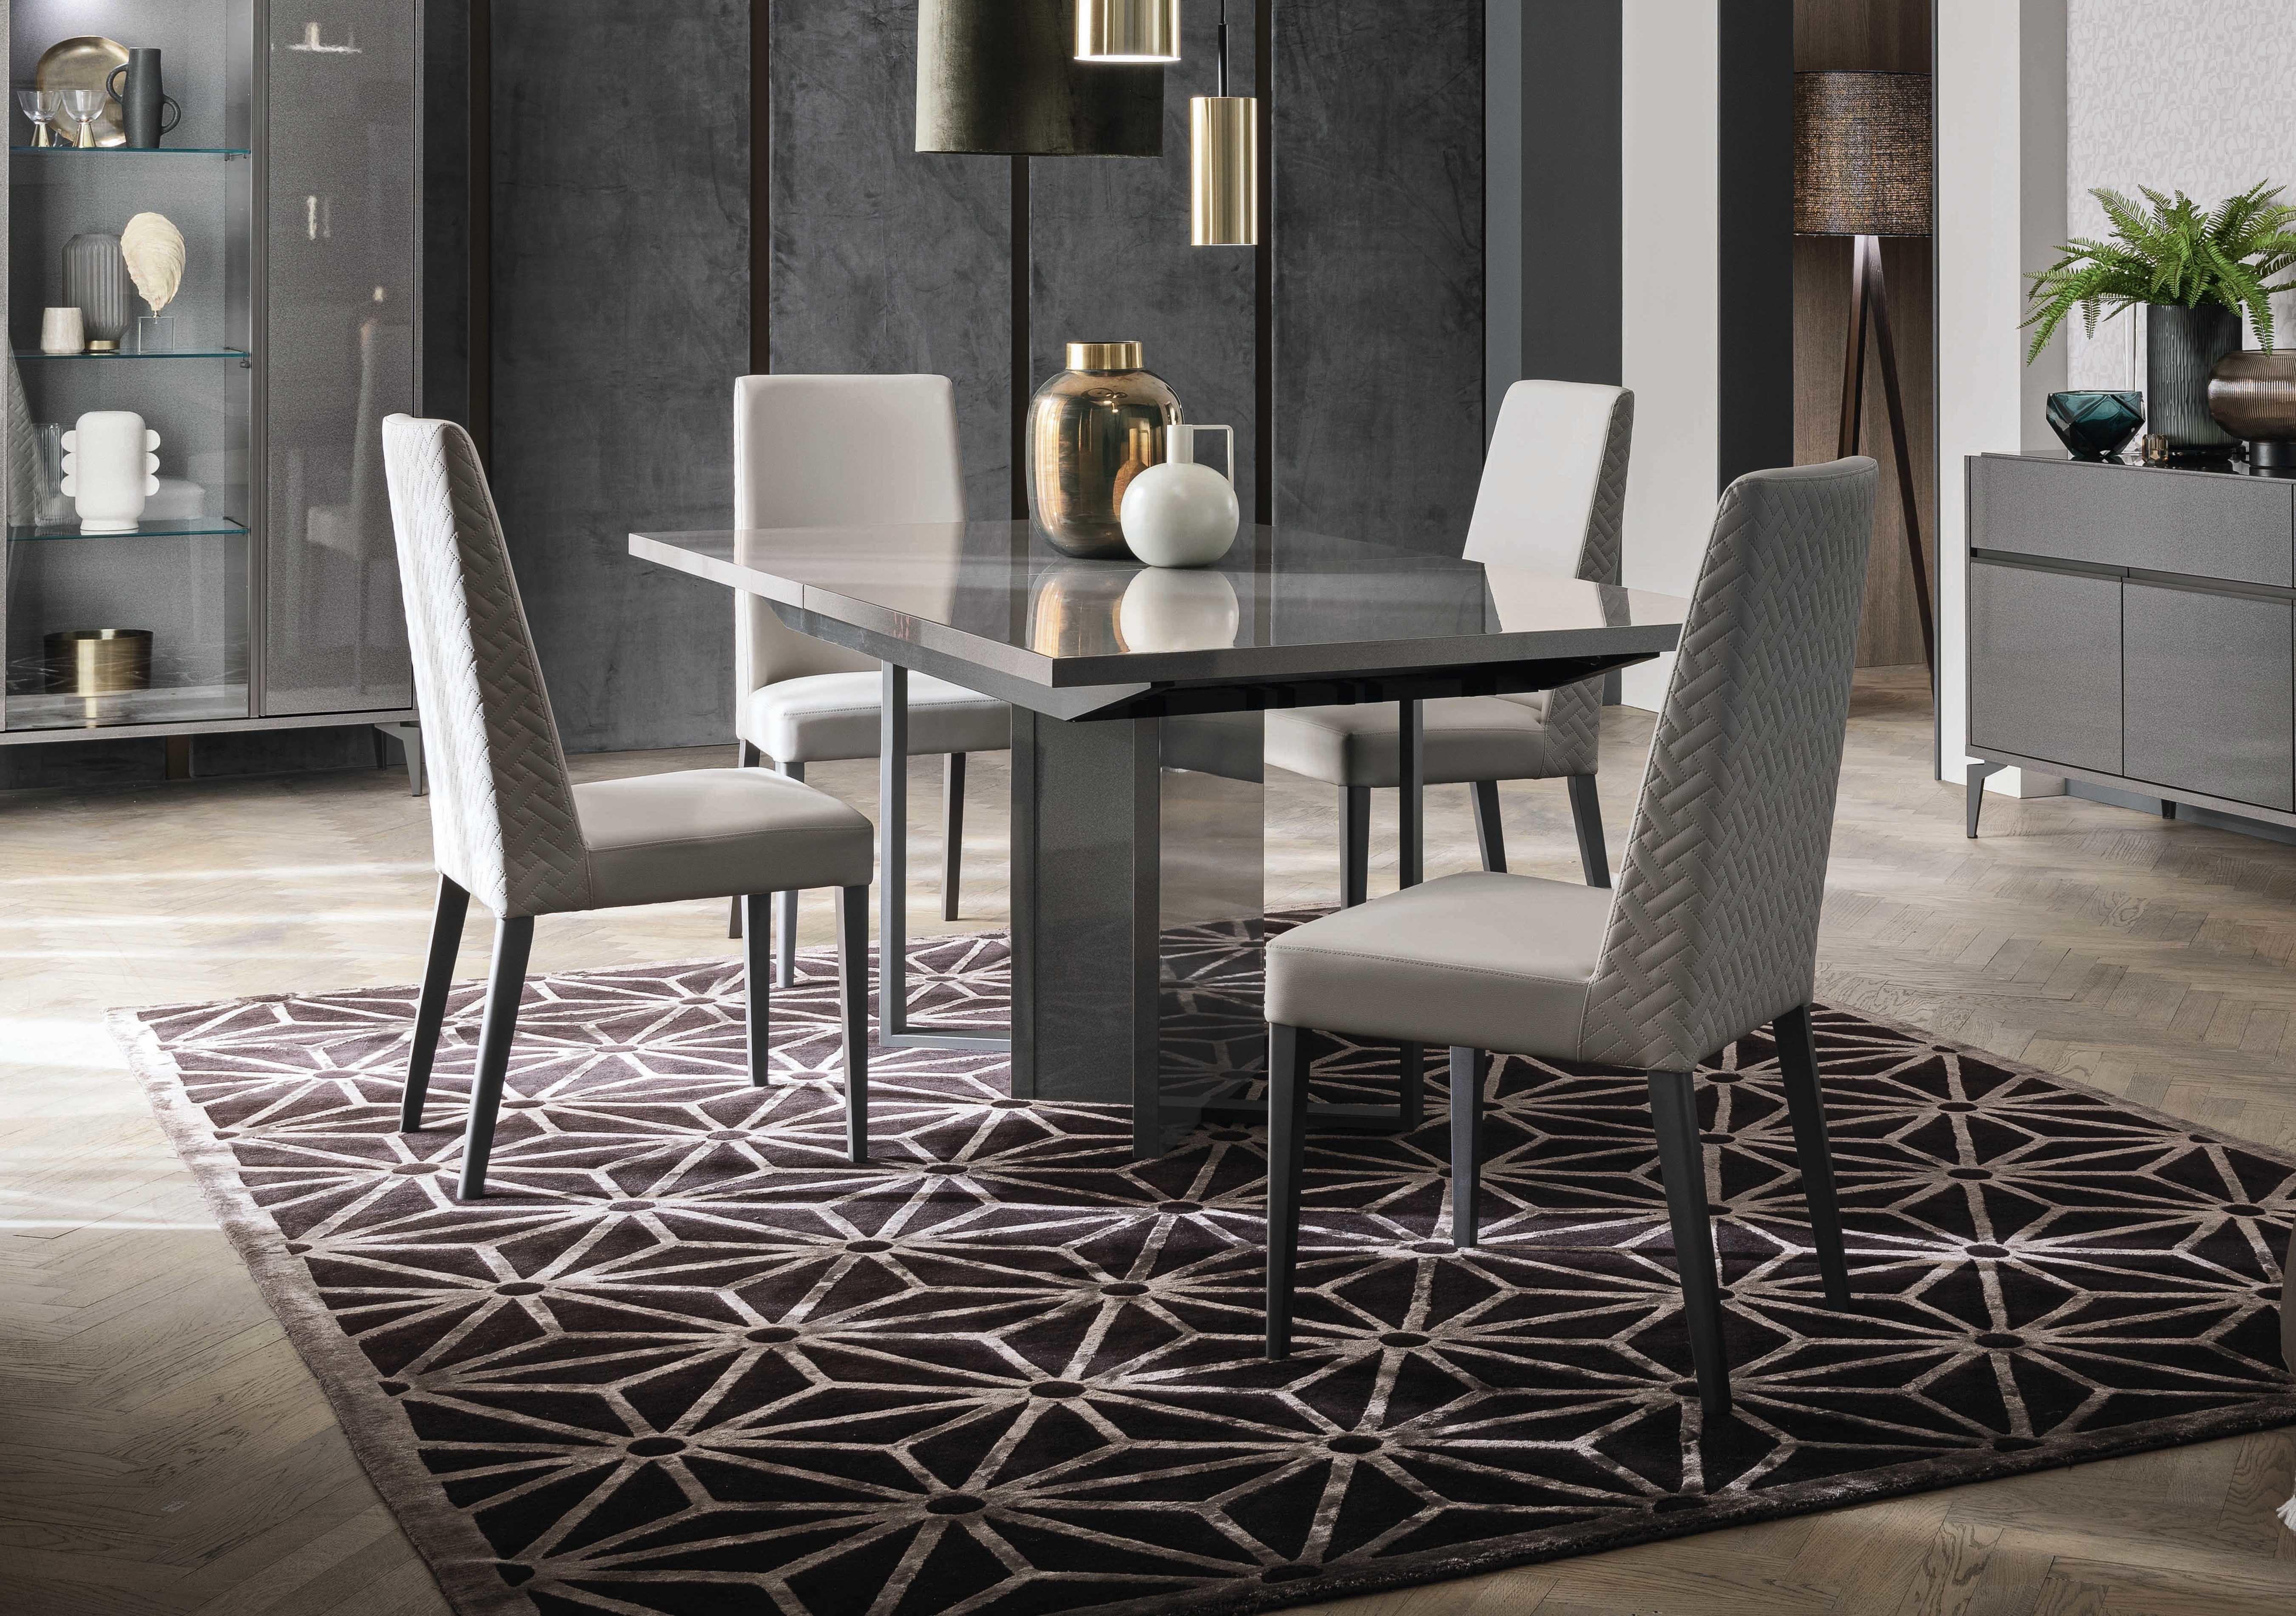 Cristina Small Extending Dining Table and 4 Dining Chairs Dining Set in  on Furniture Village